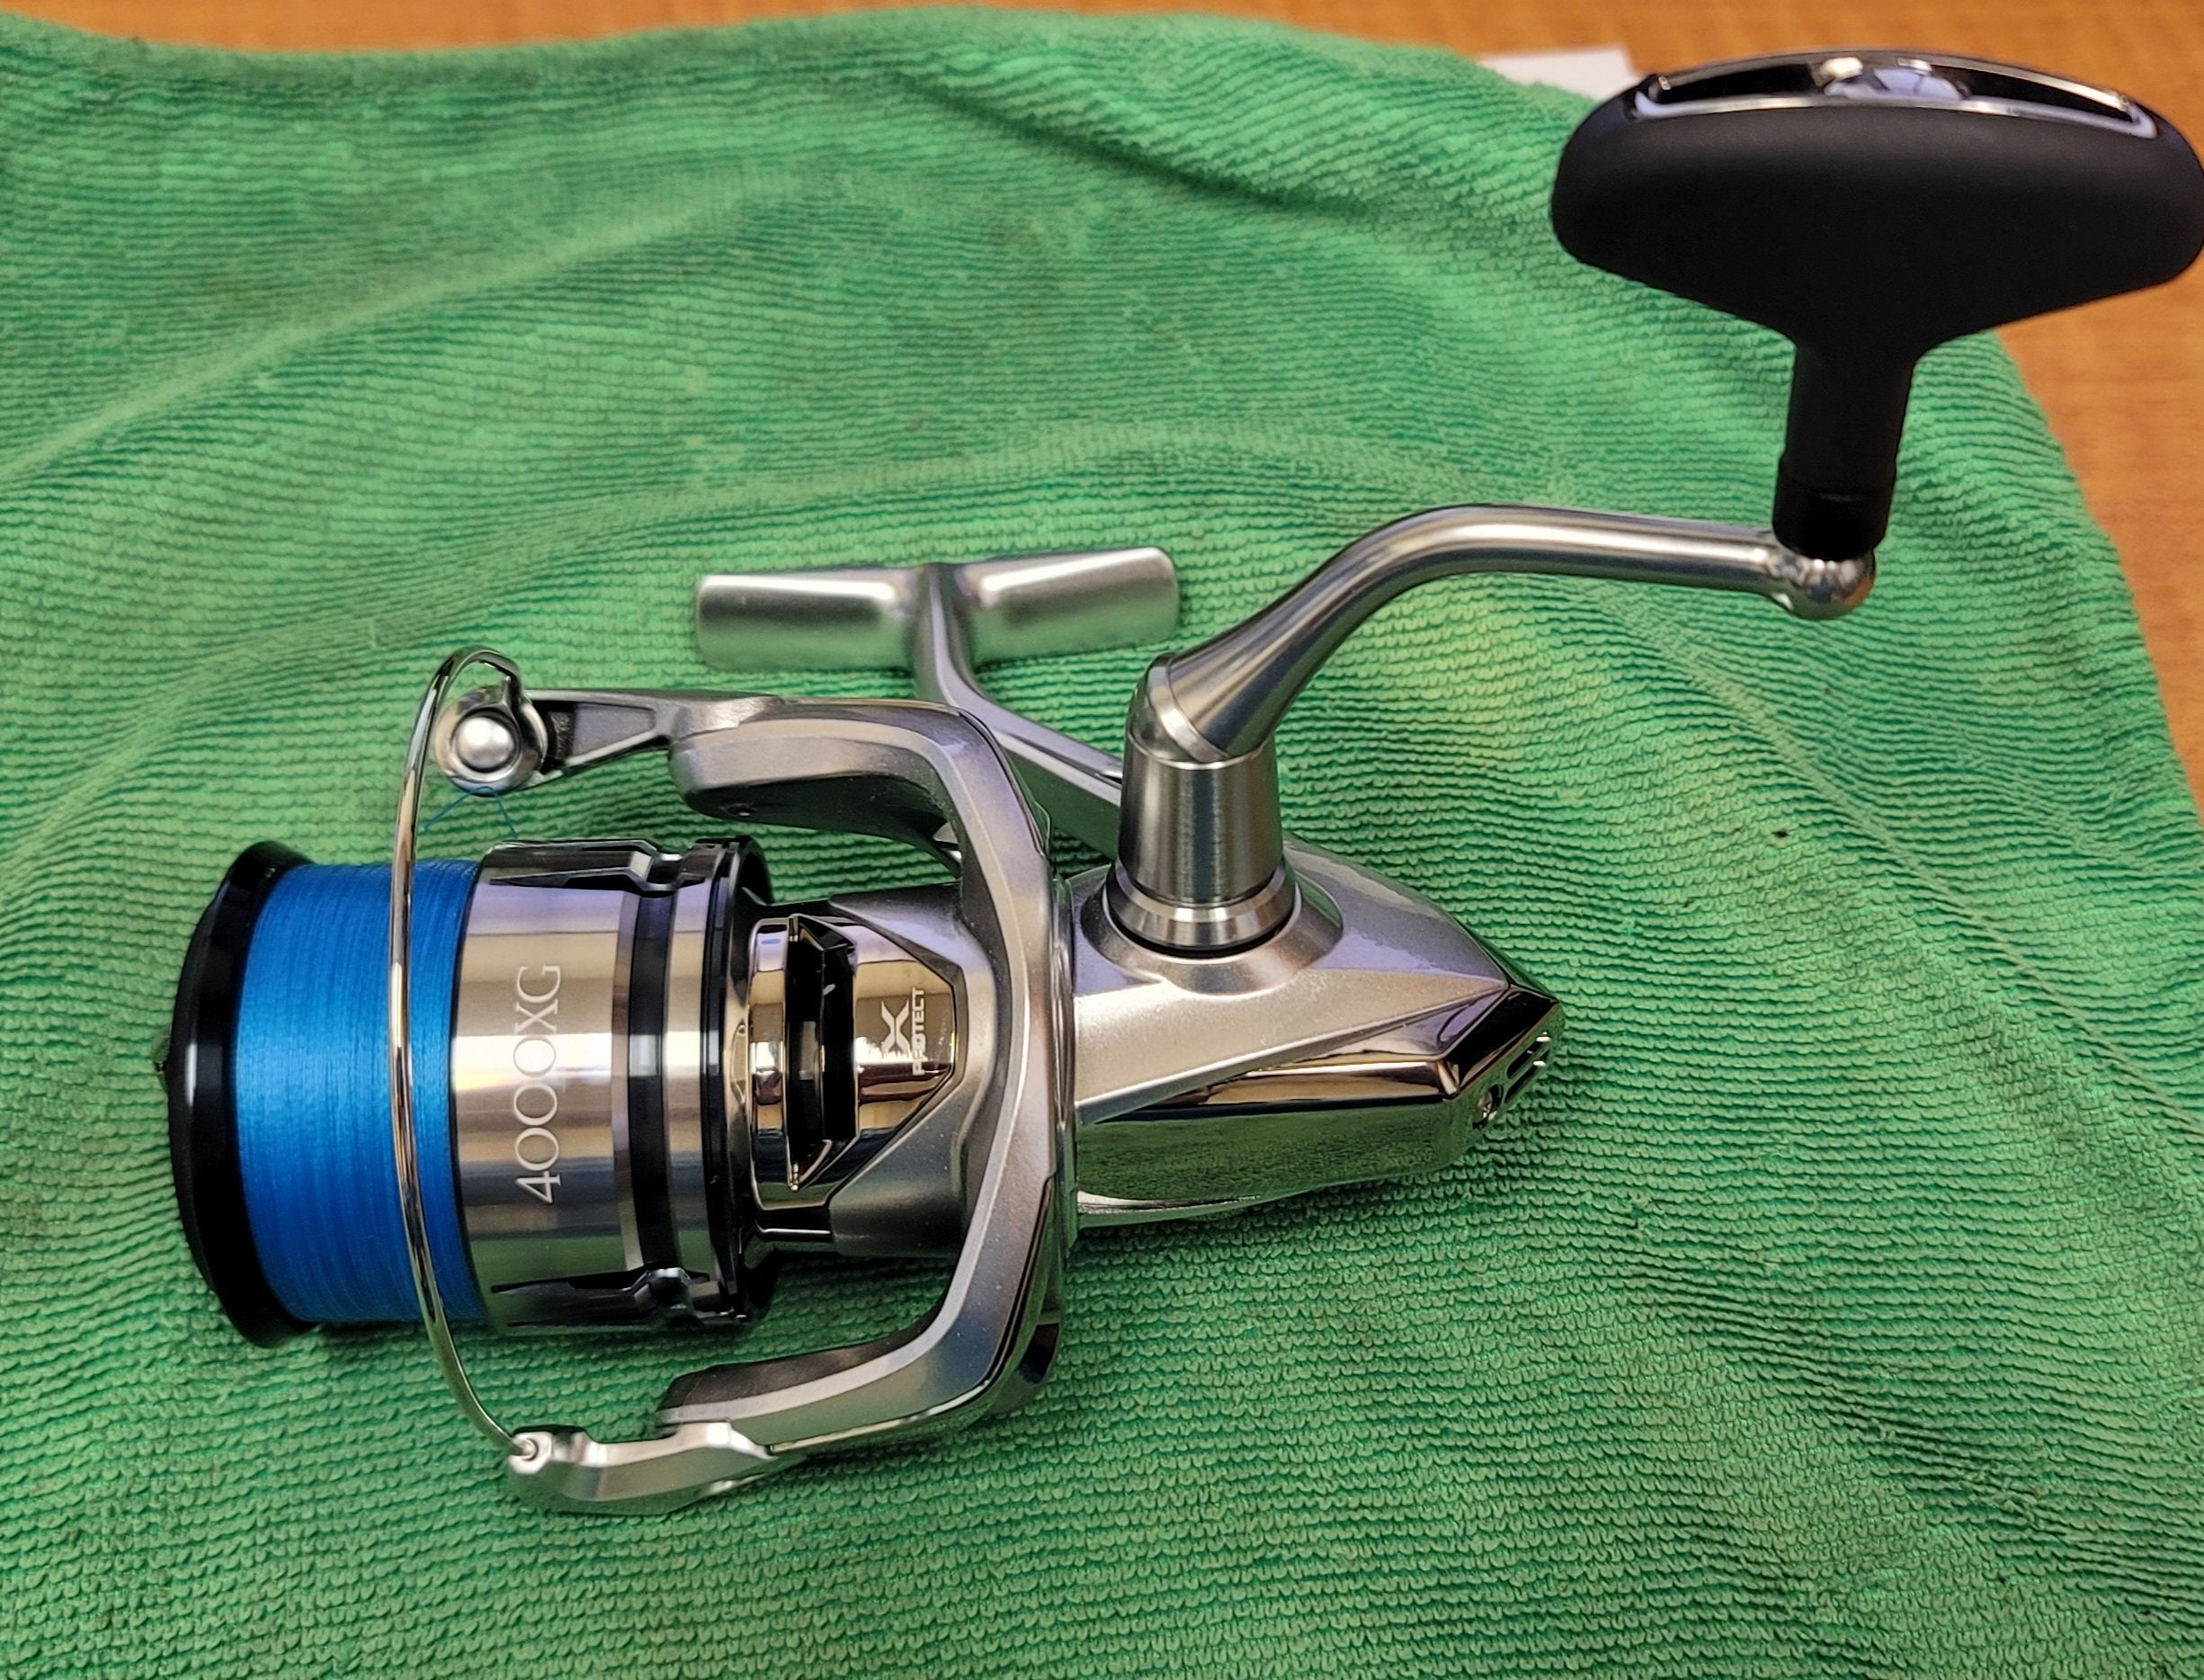 looking for a new 2500/3000 size inshore spinning reel for the flats/marsh  $300 budget